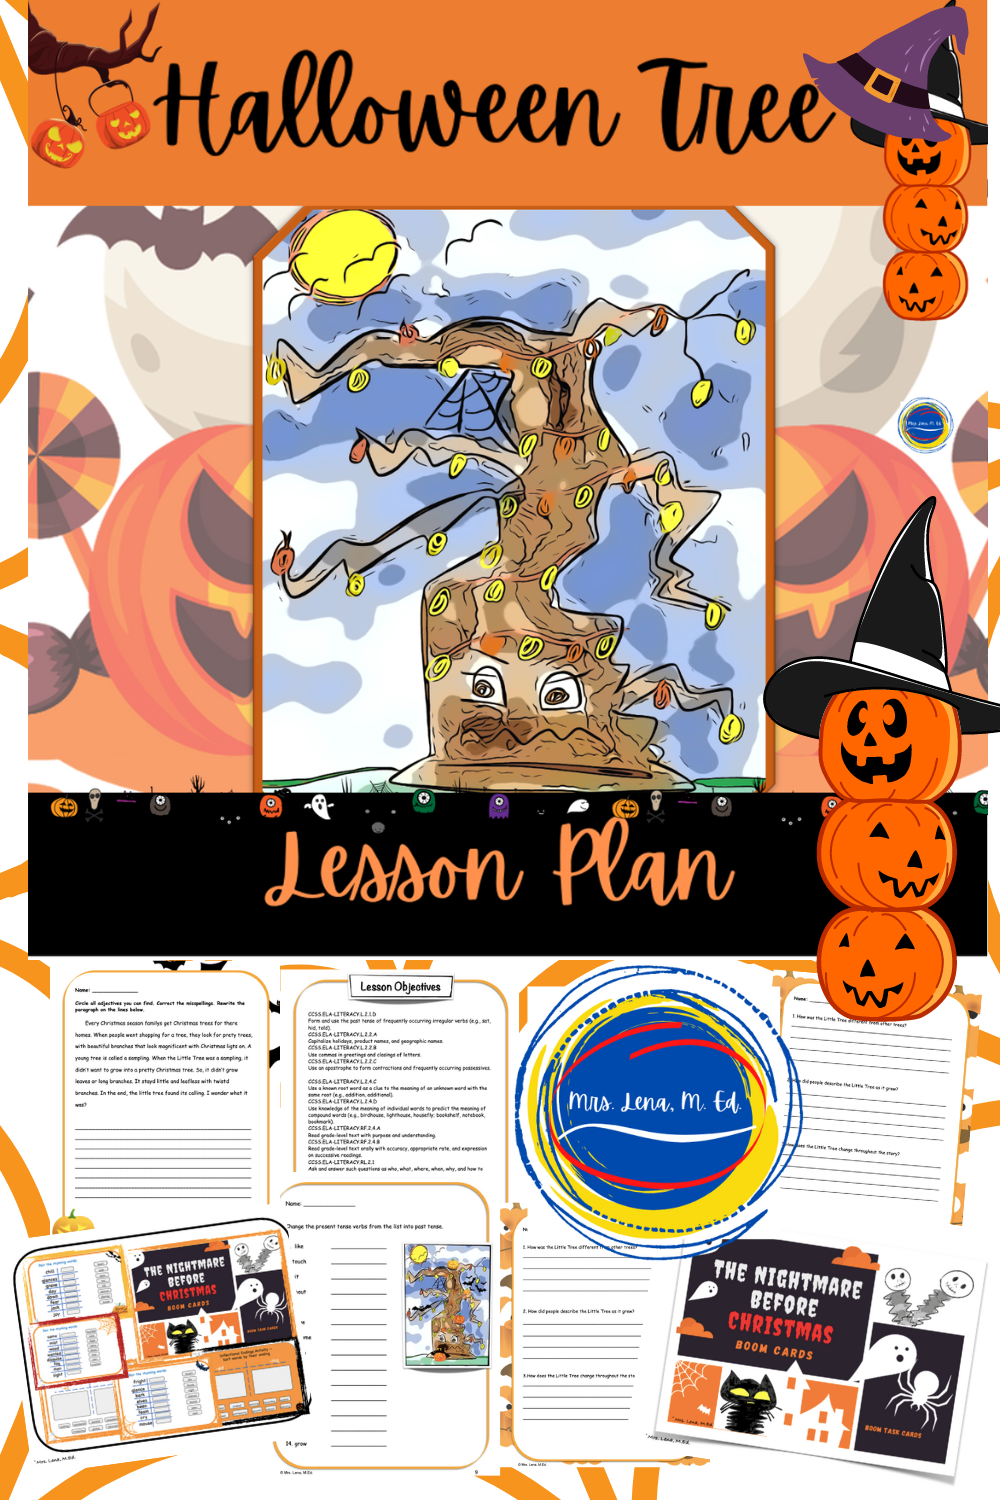 The Halloween Tree by Montanari Lesson with Hallowee Boom Cards™ Game resource is perfect for teaching reading comprehension, word study, inflectional endings, story elements and much more